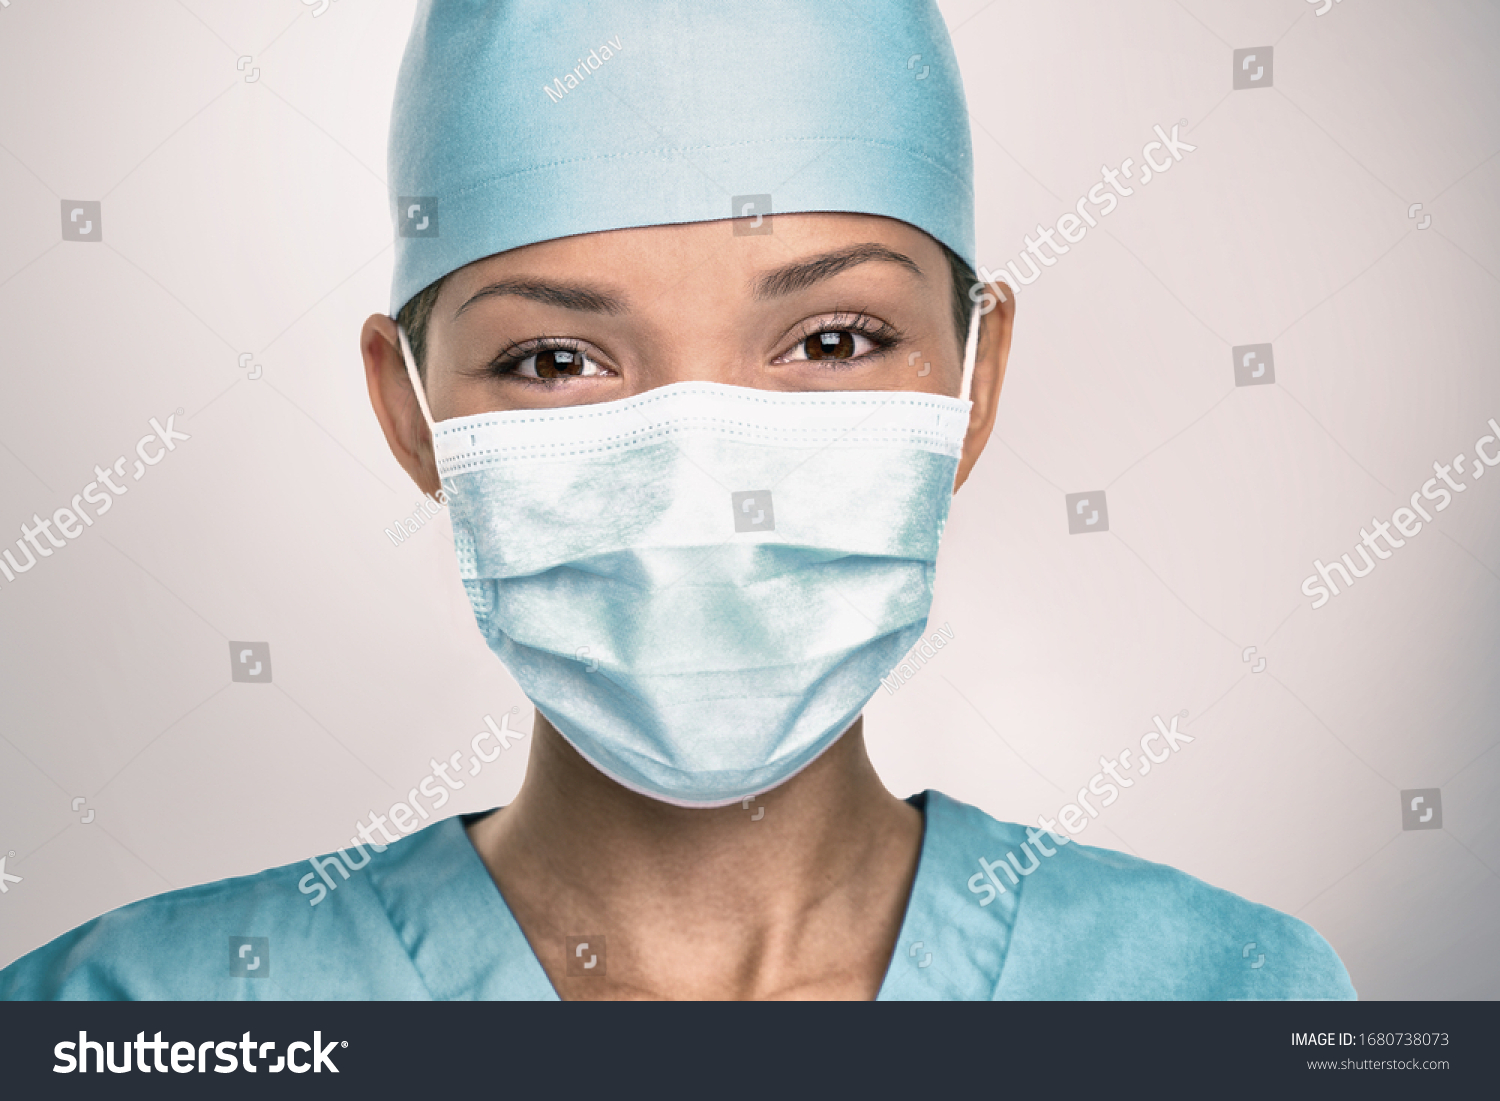 COVID-19 Coronavirus pandemic happy Asian doctor positive with hope wearing surgical mask and blue protective scrubs at hospital. Inspiring confidence in the future to solve the crisis. #1680738073